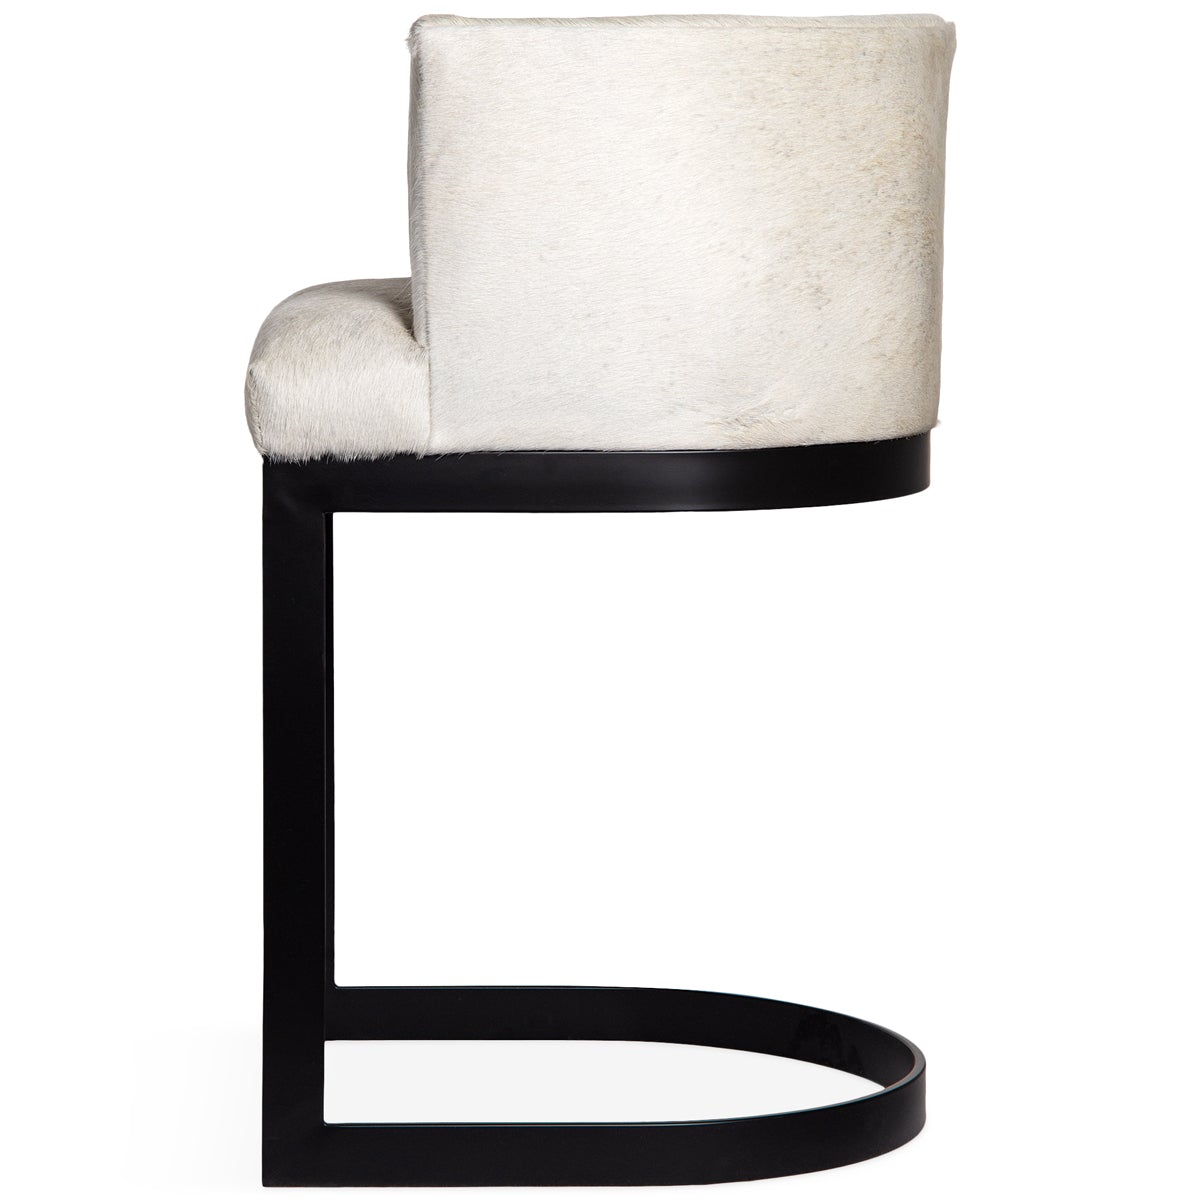 Ibiza Bar and Counter Stool in Cowhide - ModShop1.com